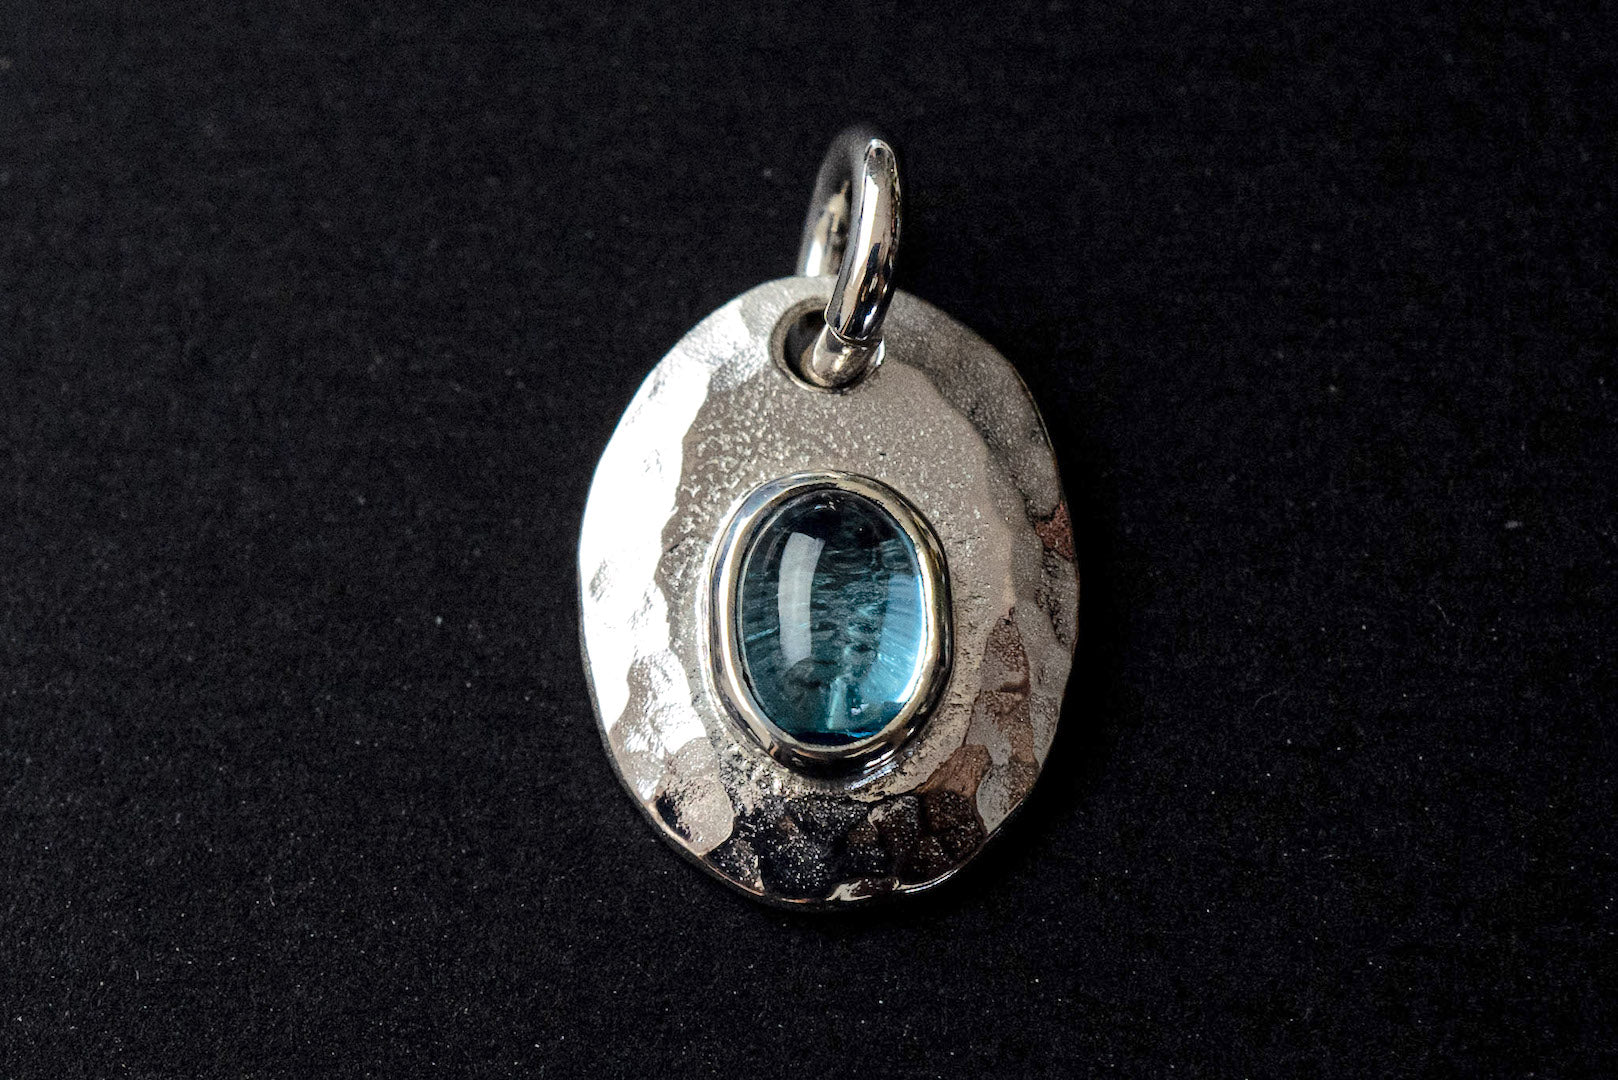 Legend Size Small "Plate" Pendant With Blue Topaz (P-1-BT)